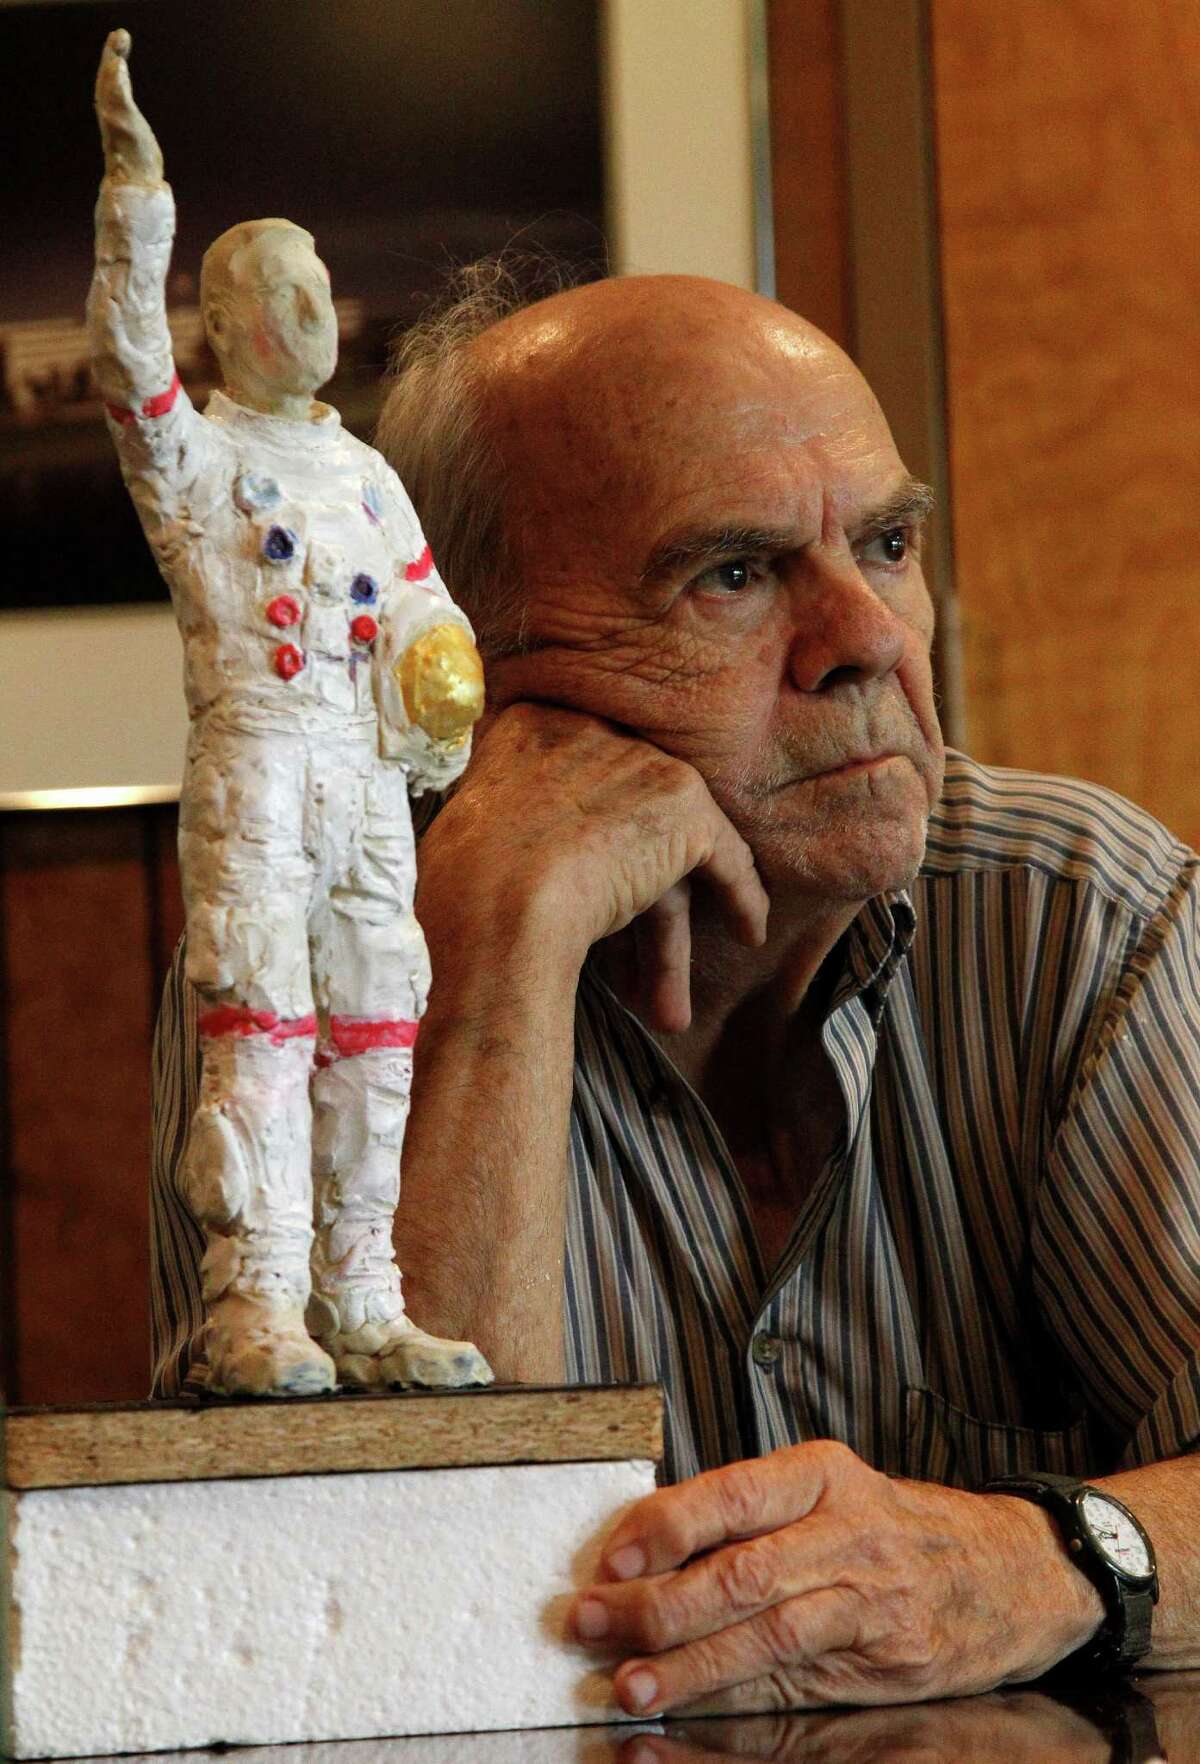 Artist David Adickes is creating a statue of an Apollo astronaut in Webster. He and others discussed the project on Wednesday in Houston. The statue will be 100 feet tall.